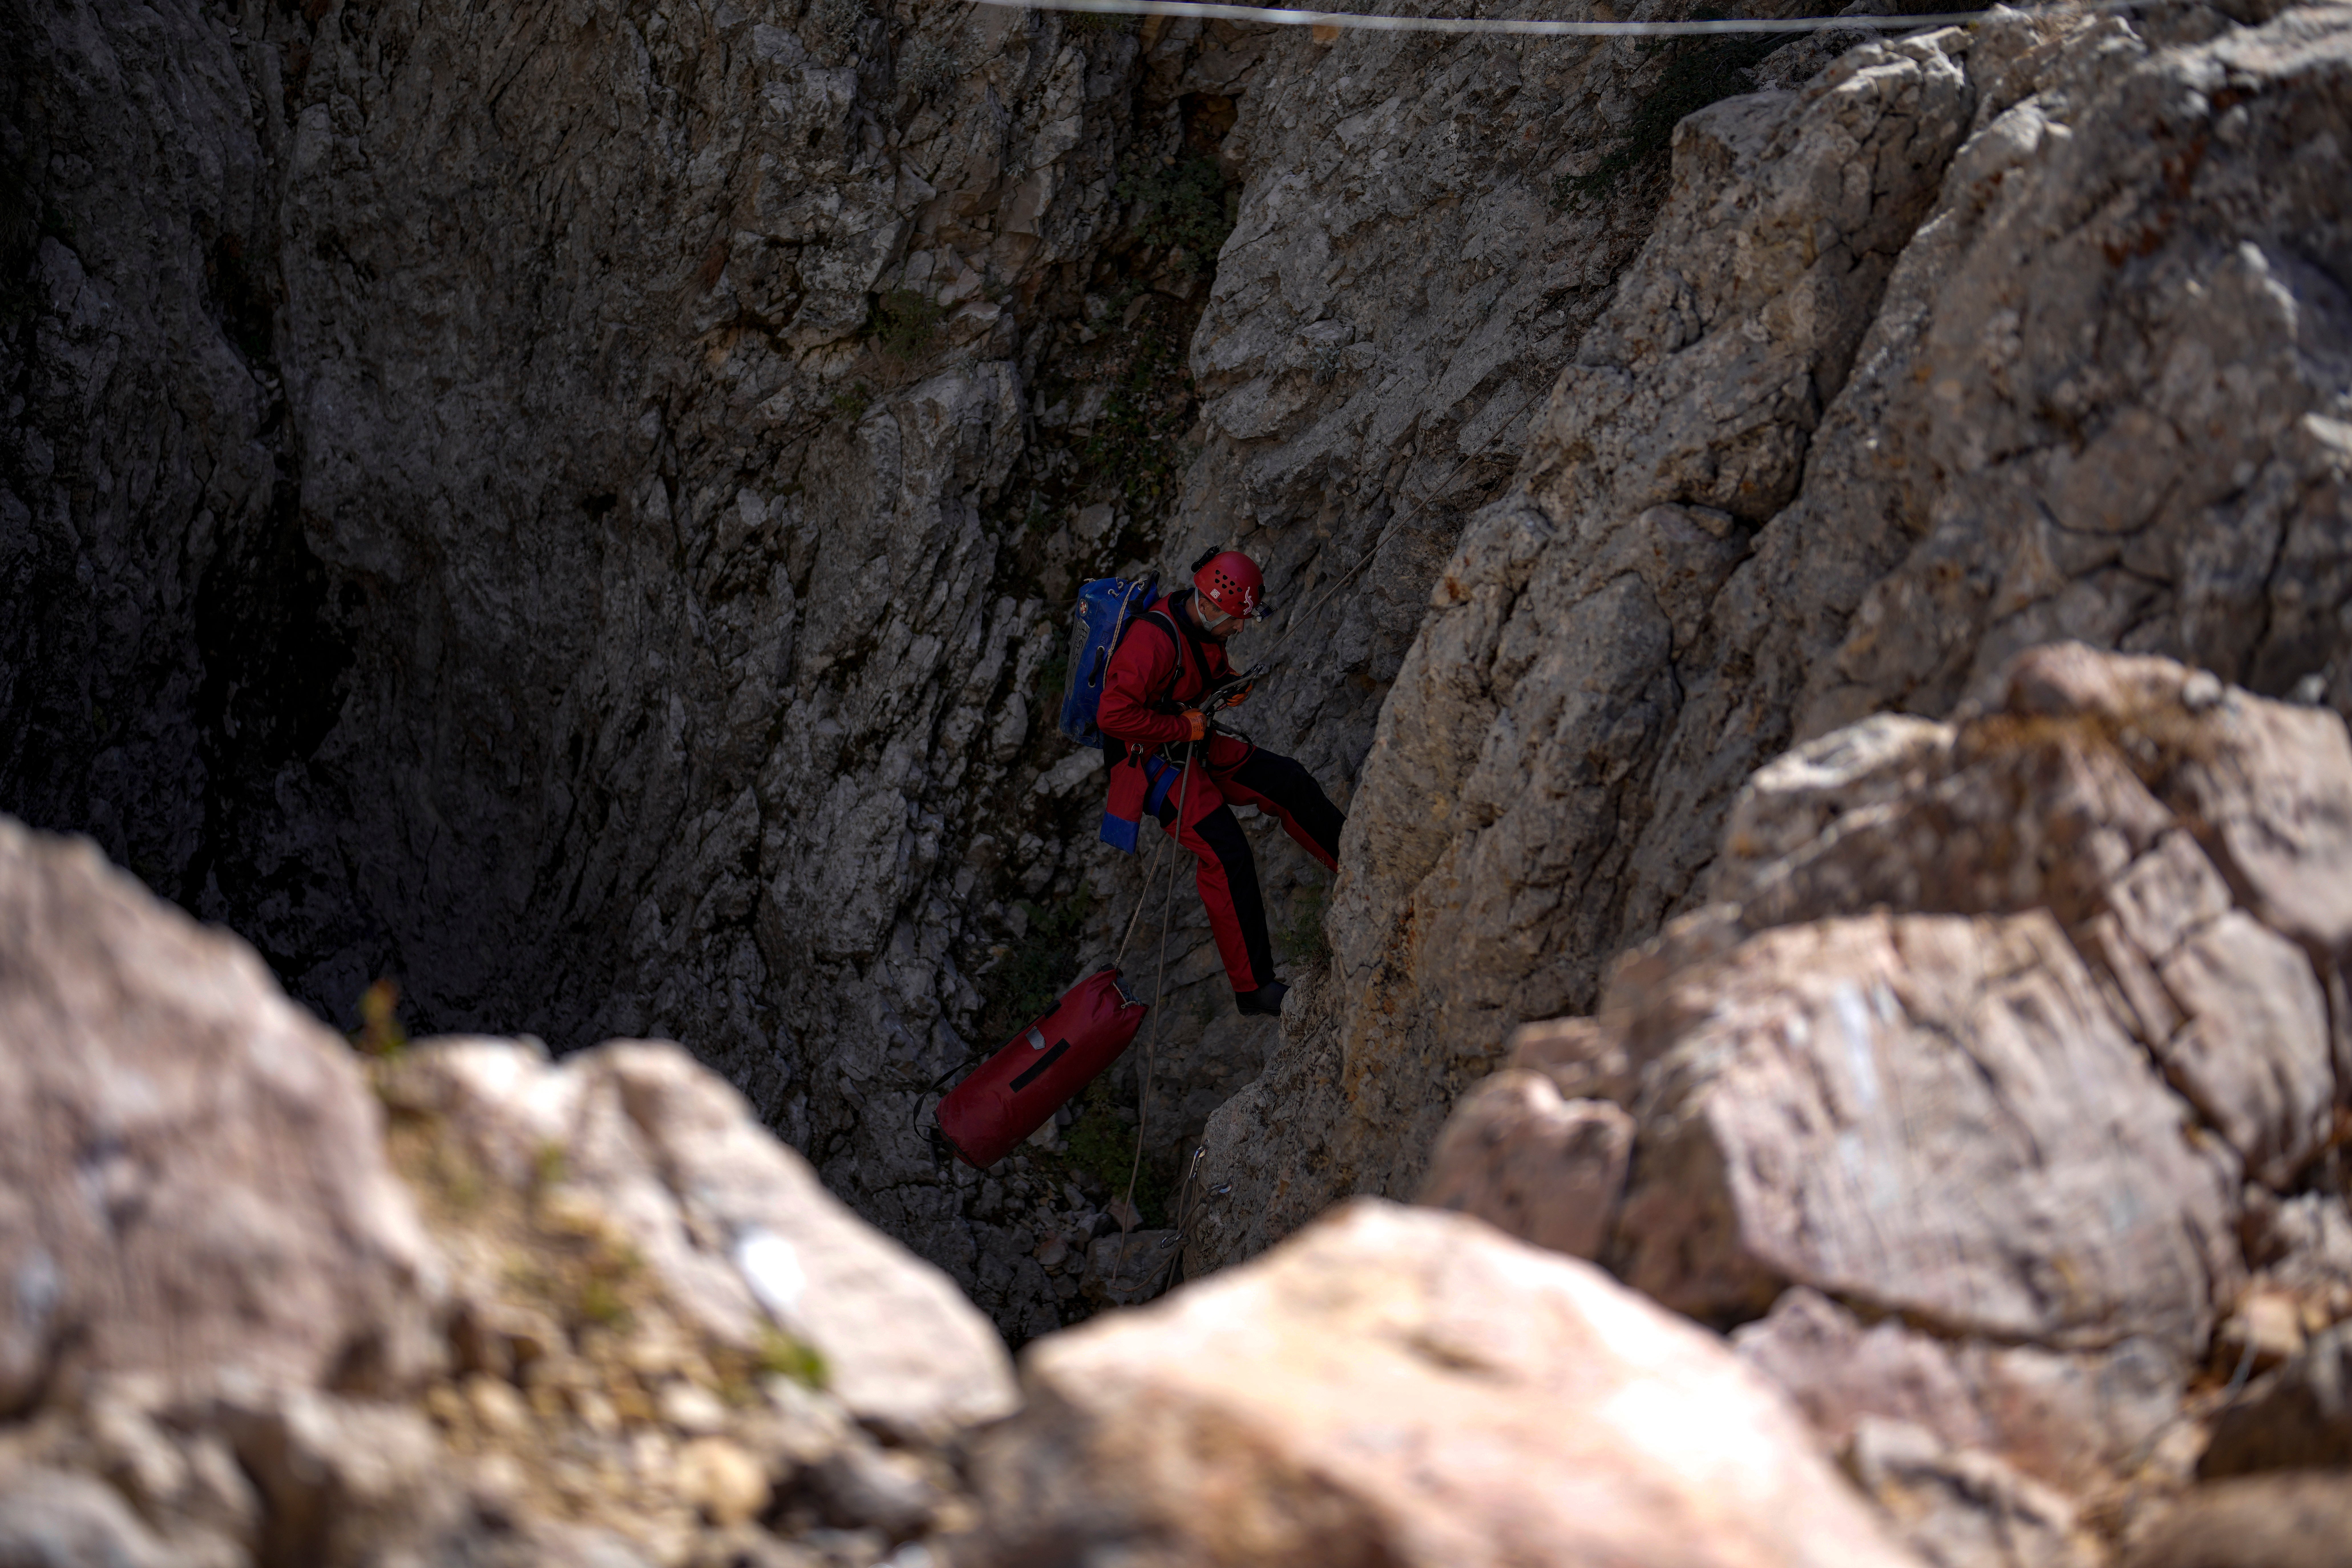 A European Cave Rescue Association member goes down into the Morca cave during Dickey’s rescue